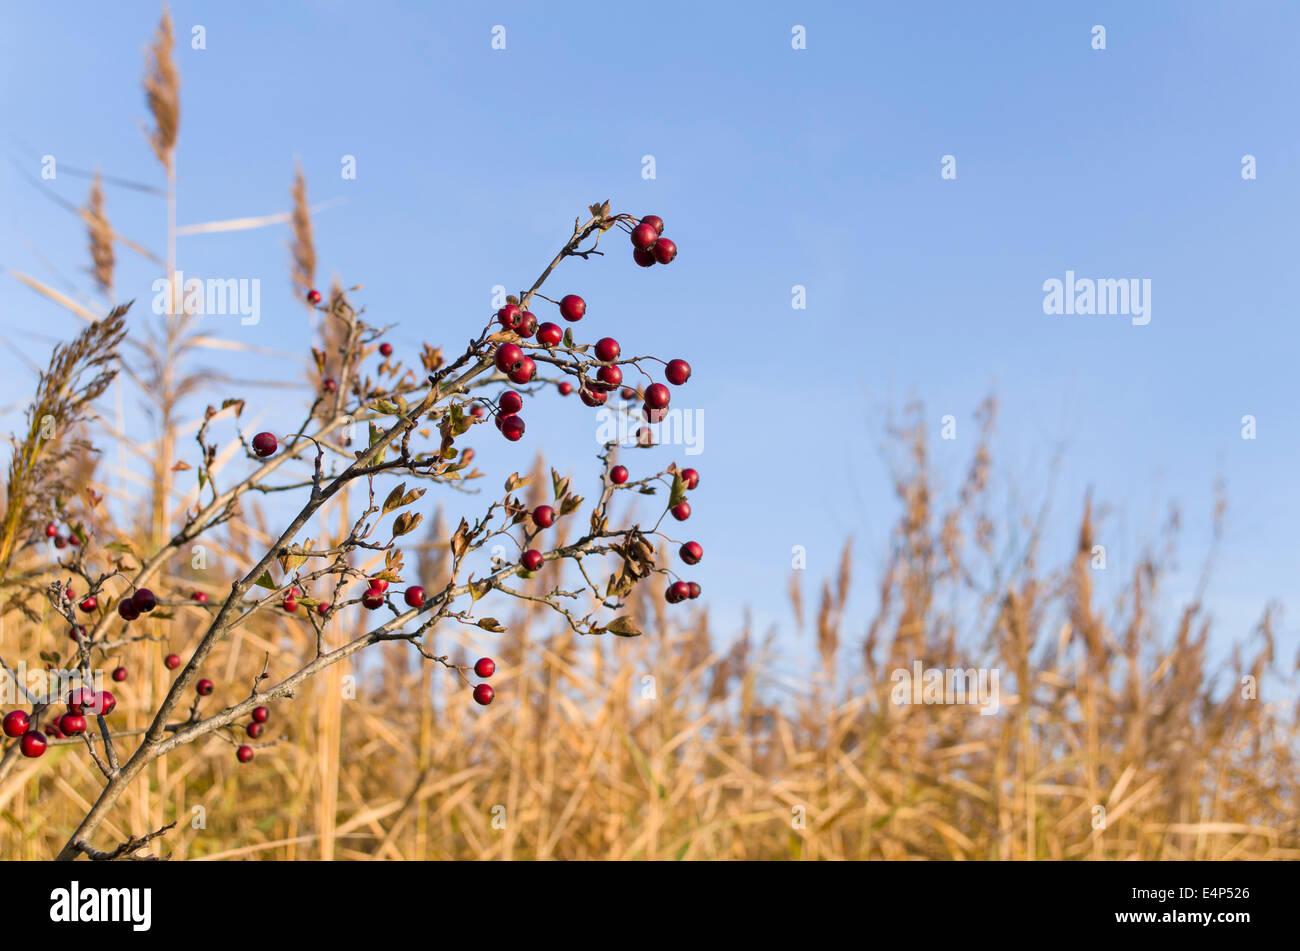 Common Hawthorn Berries in front of Reeds Stock Photo